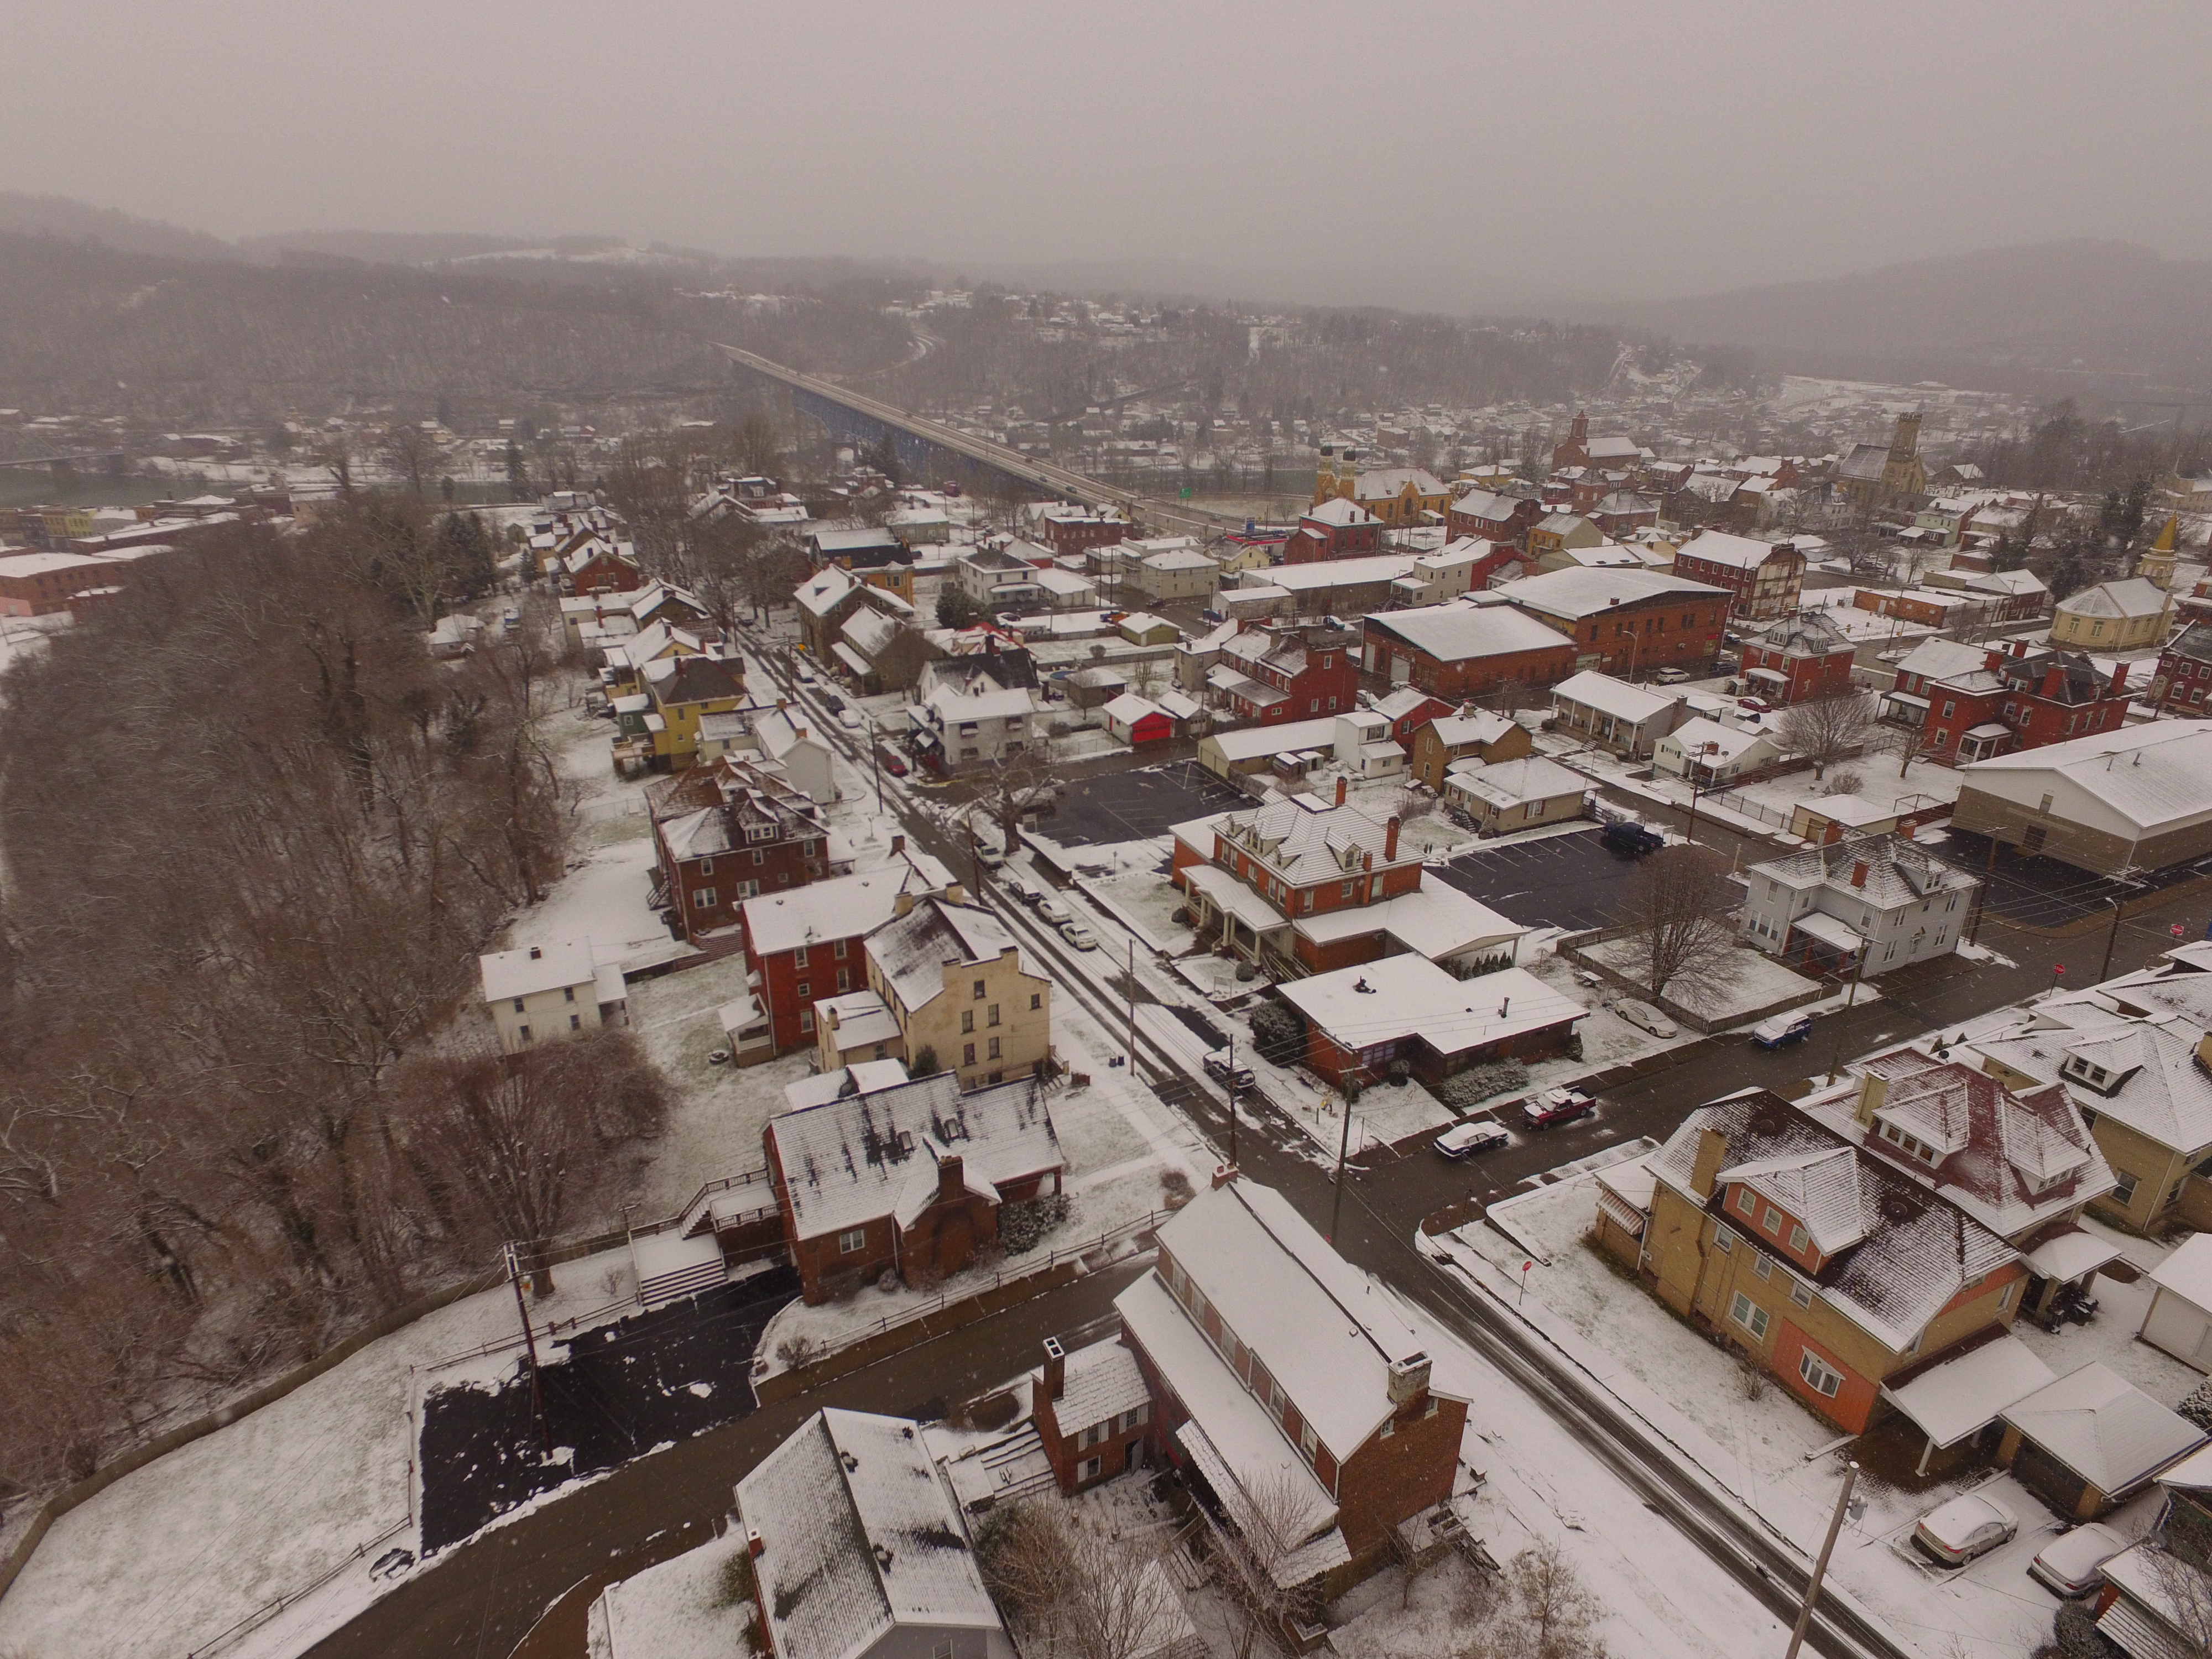 Overhead view of Brownsville, PA in the Winter